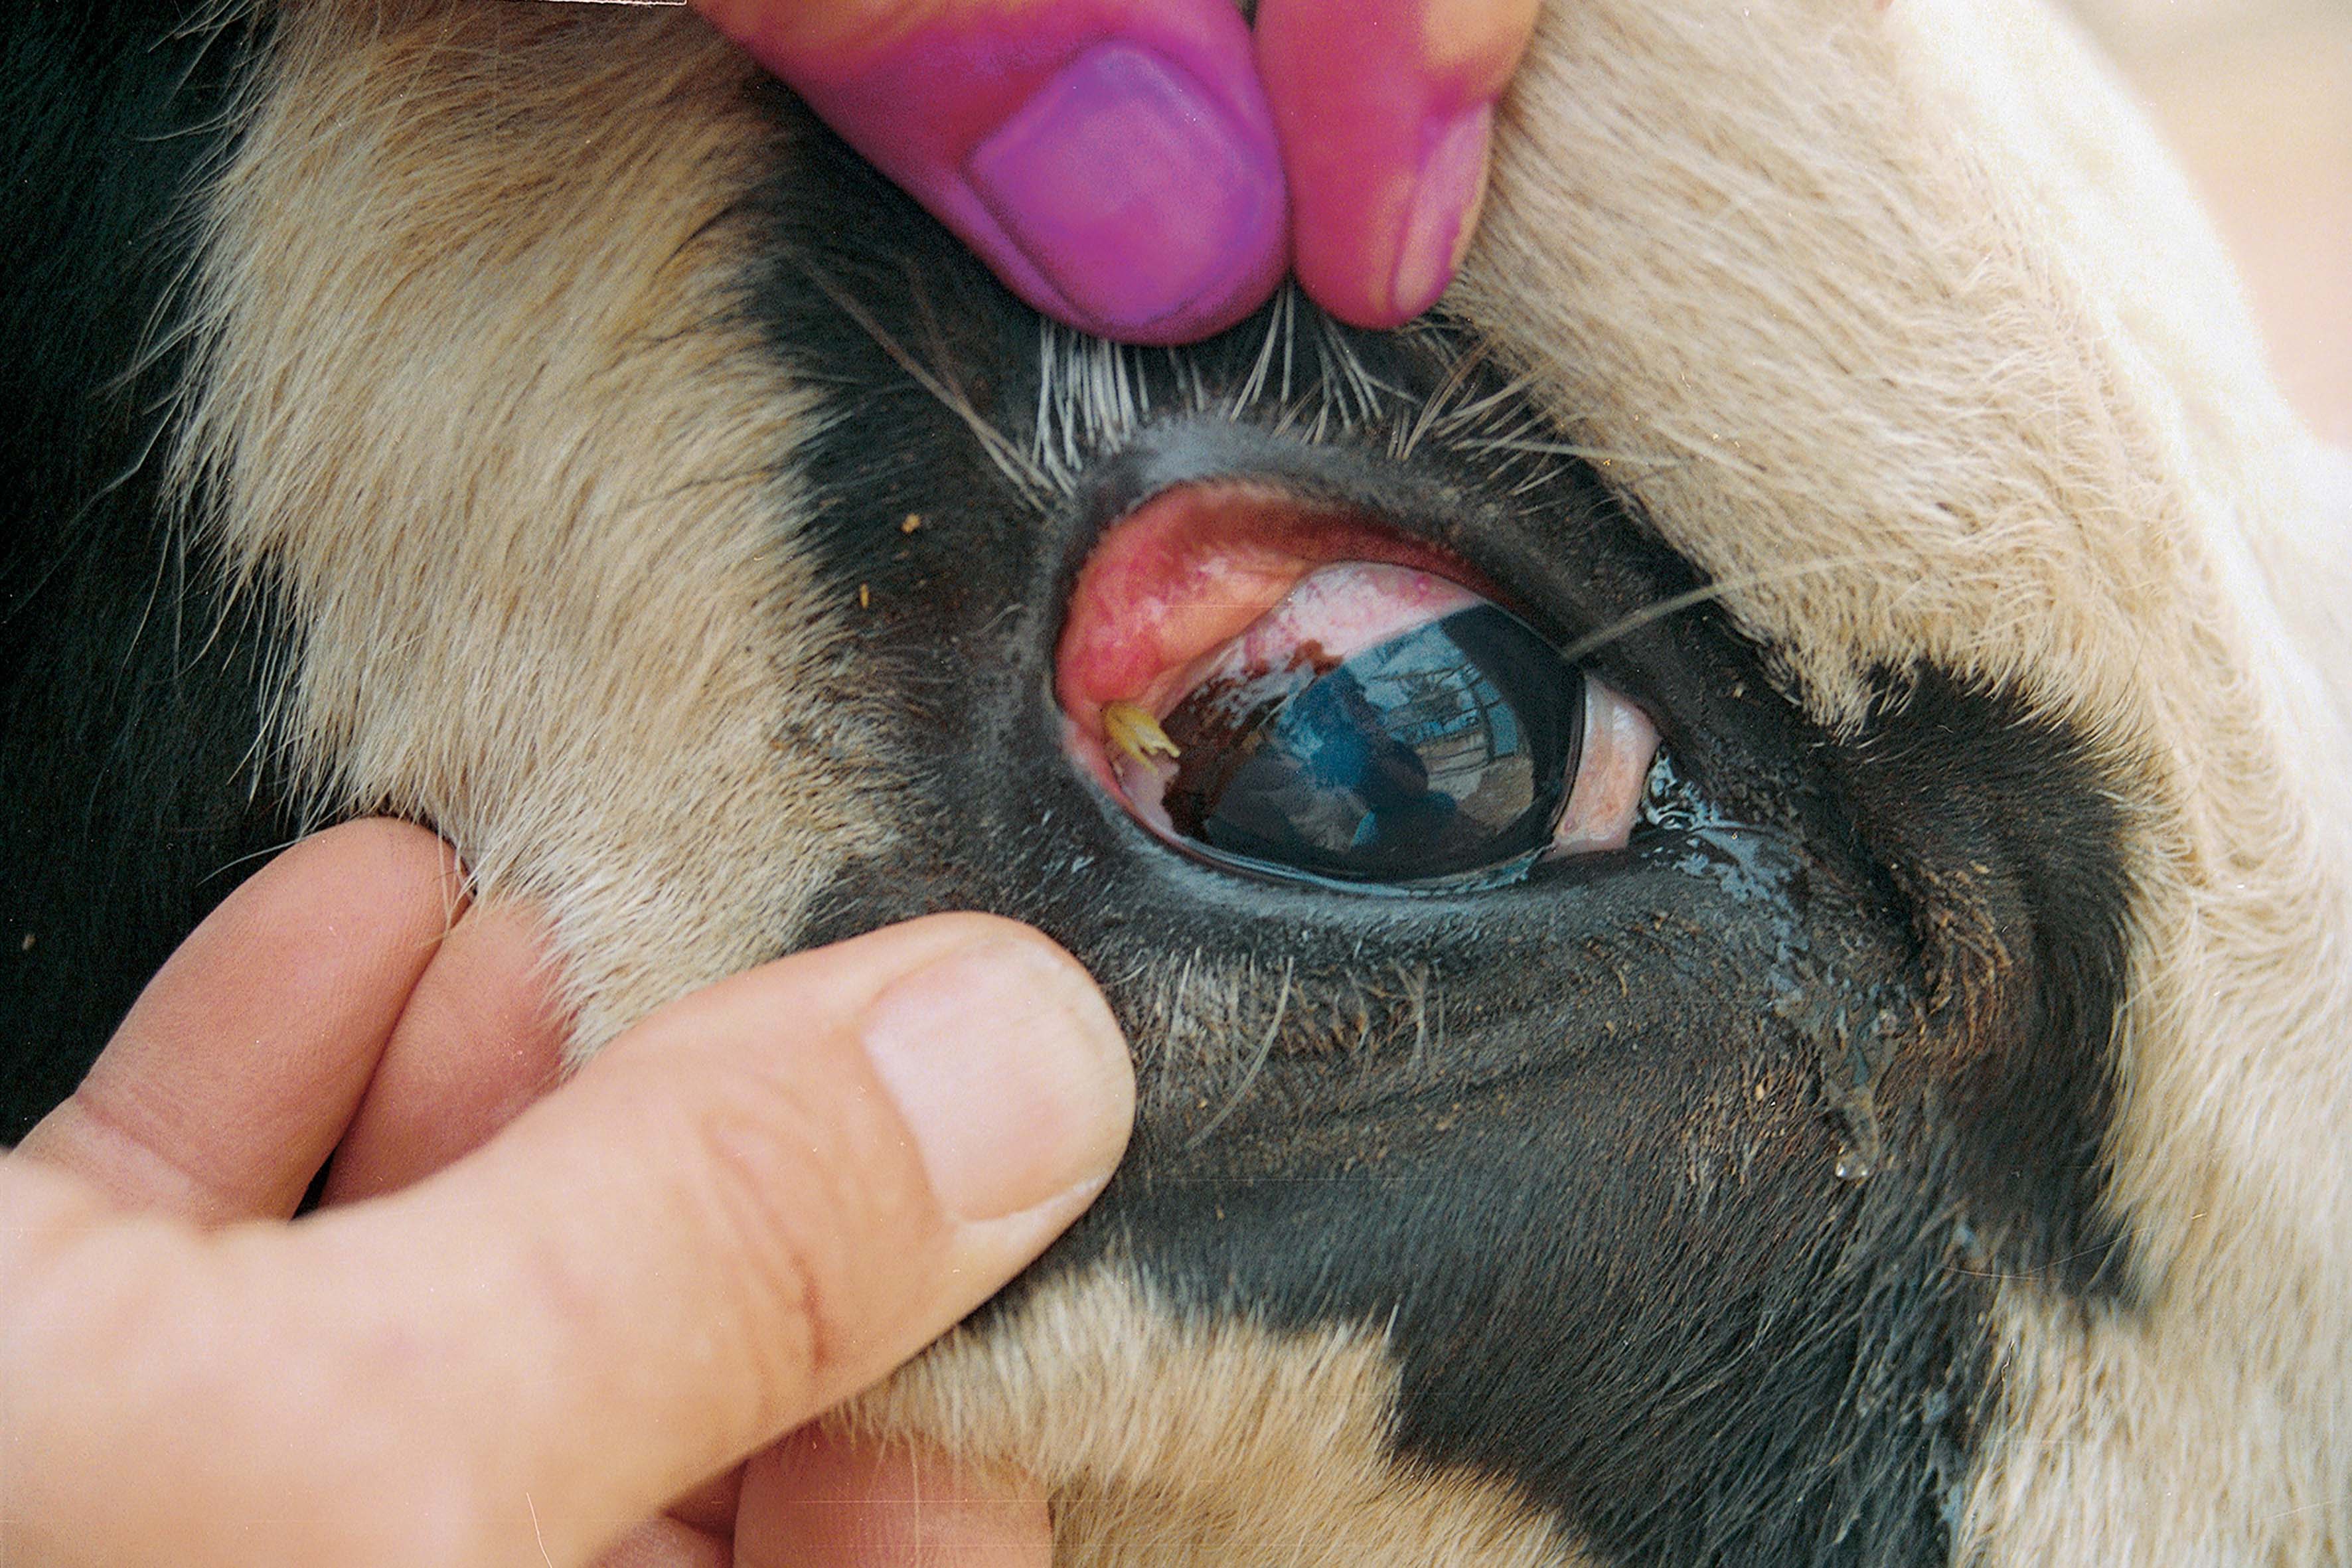 How to Care for Pink Eye in Cattle